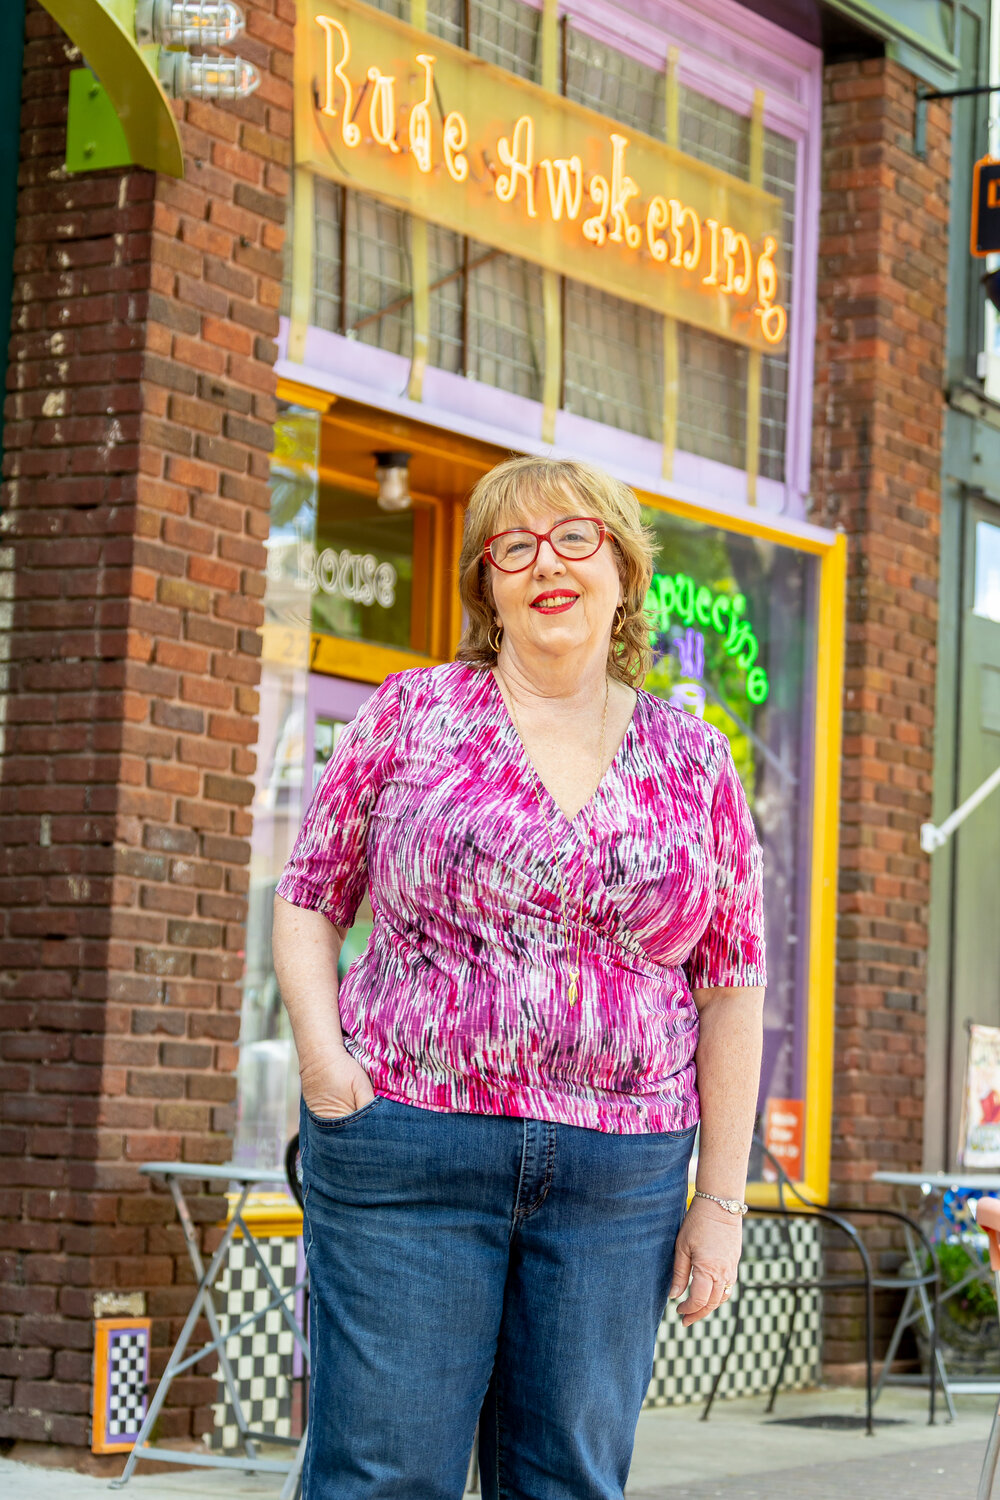 “It’s always lovely to have people think that what you have done matters. And working so hard on downtown all these years, I have this deep spot in my heart for the people who love downtown like I do.”  –Molly Arnold